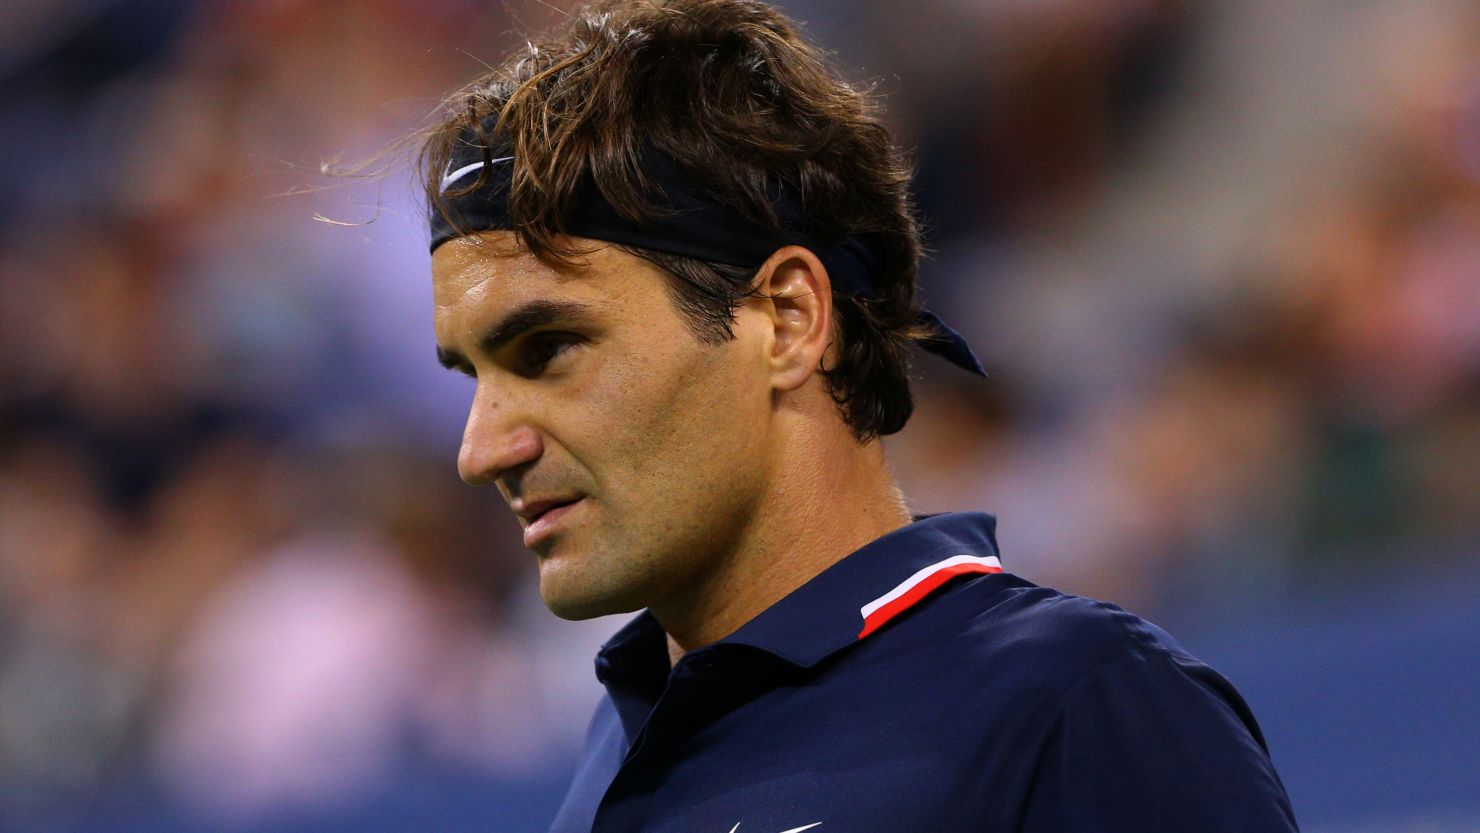 Roger Federer is through to the quarterfinals of the U.S. Open after his last 16 opponent, Mardy Fish withdrew